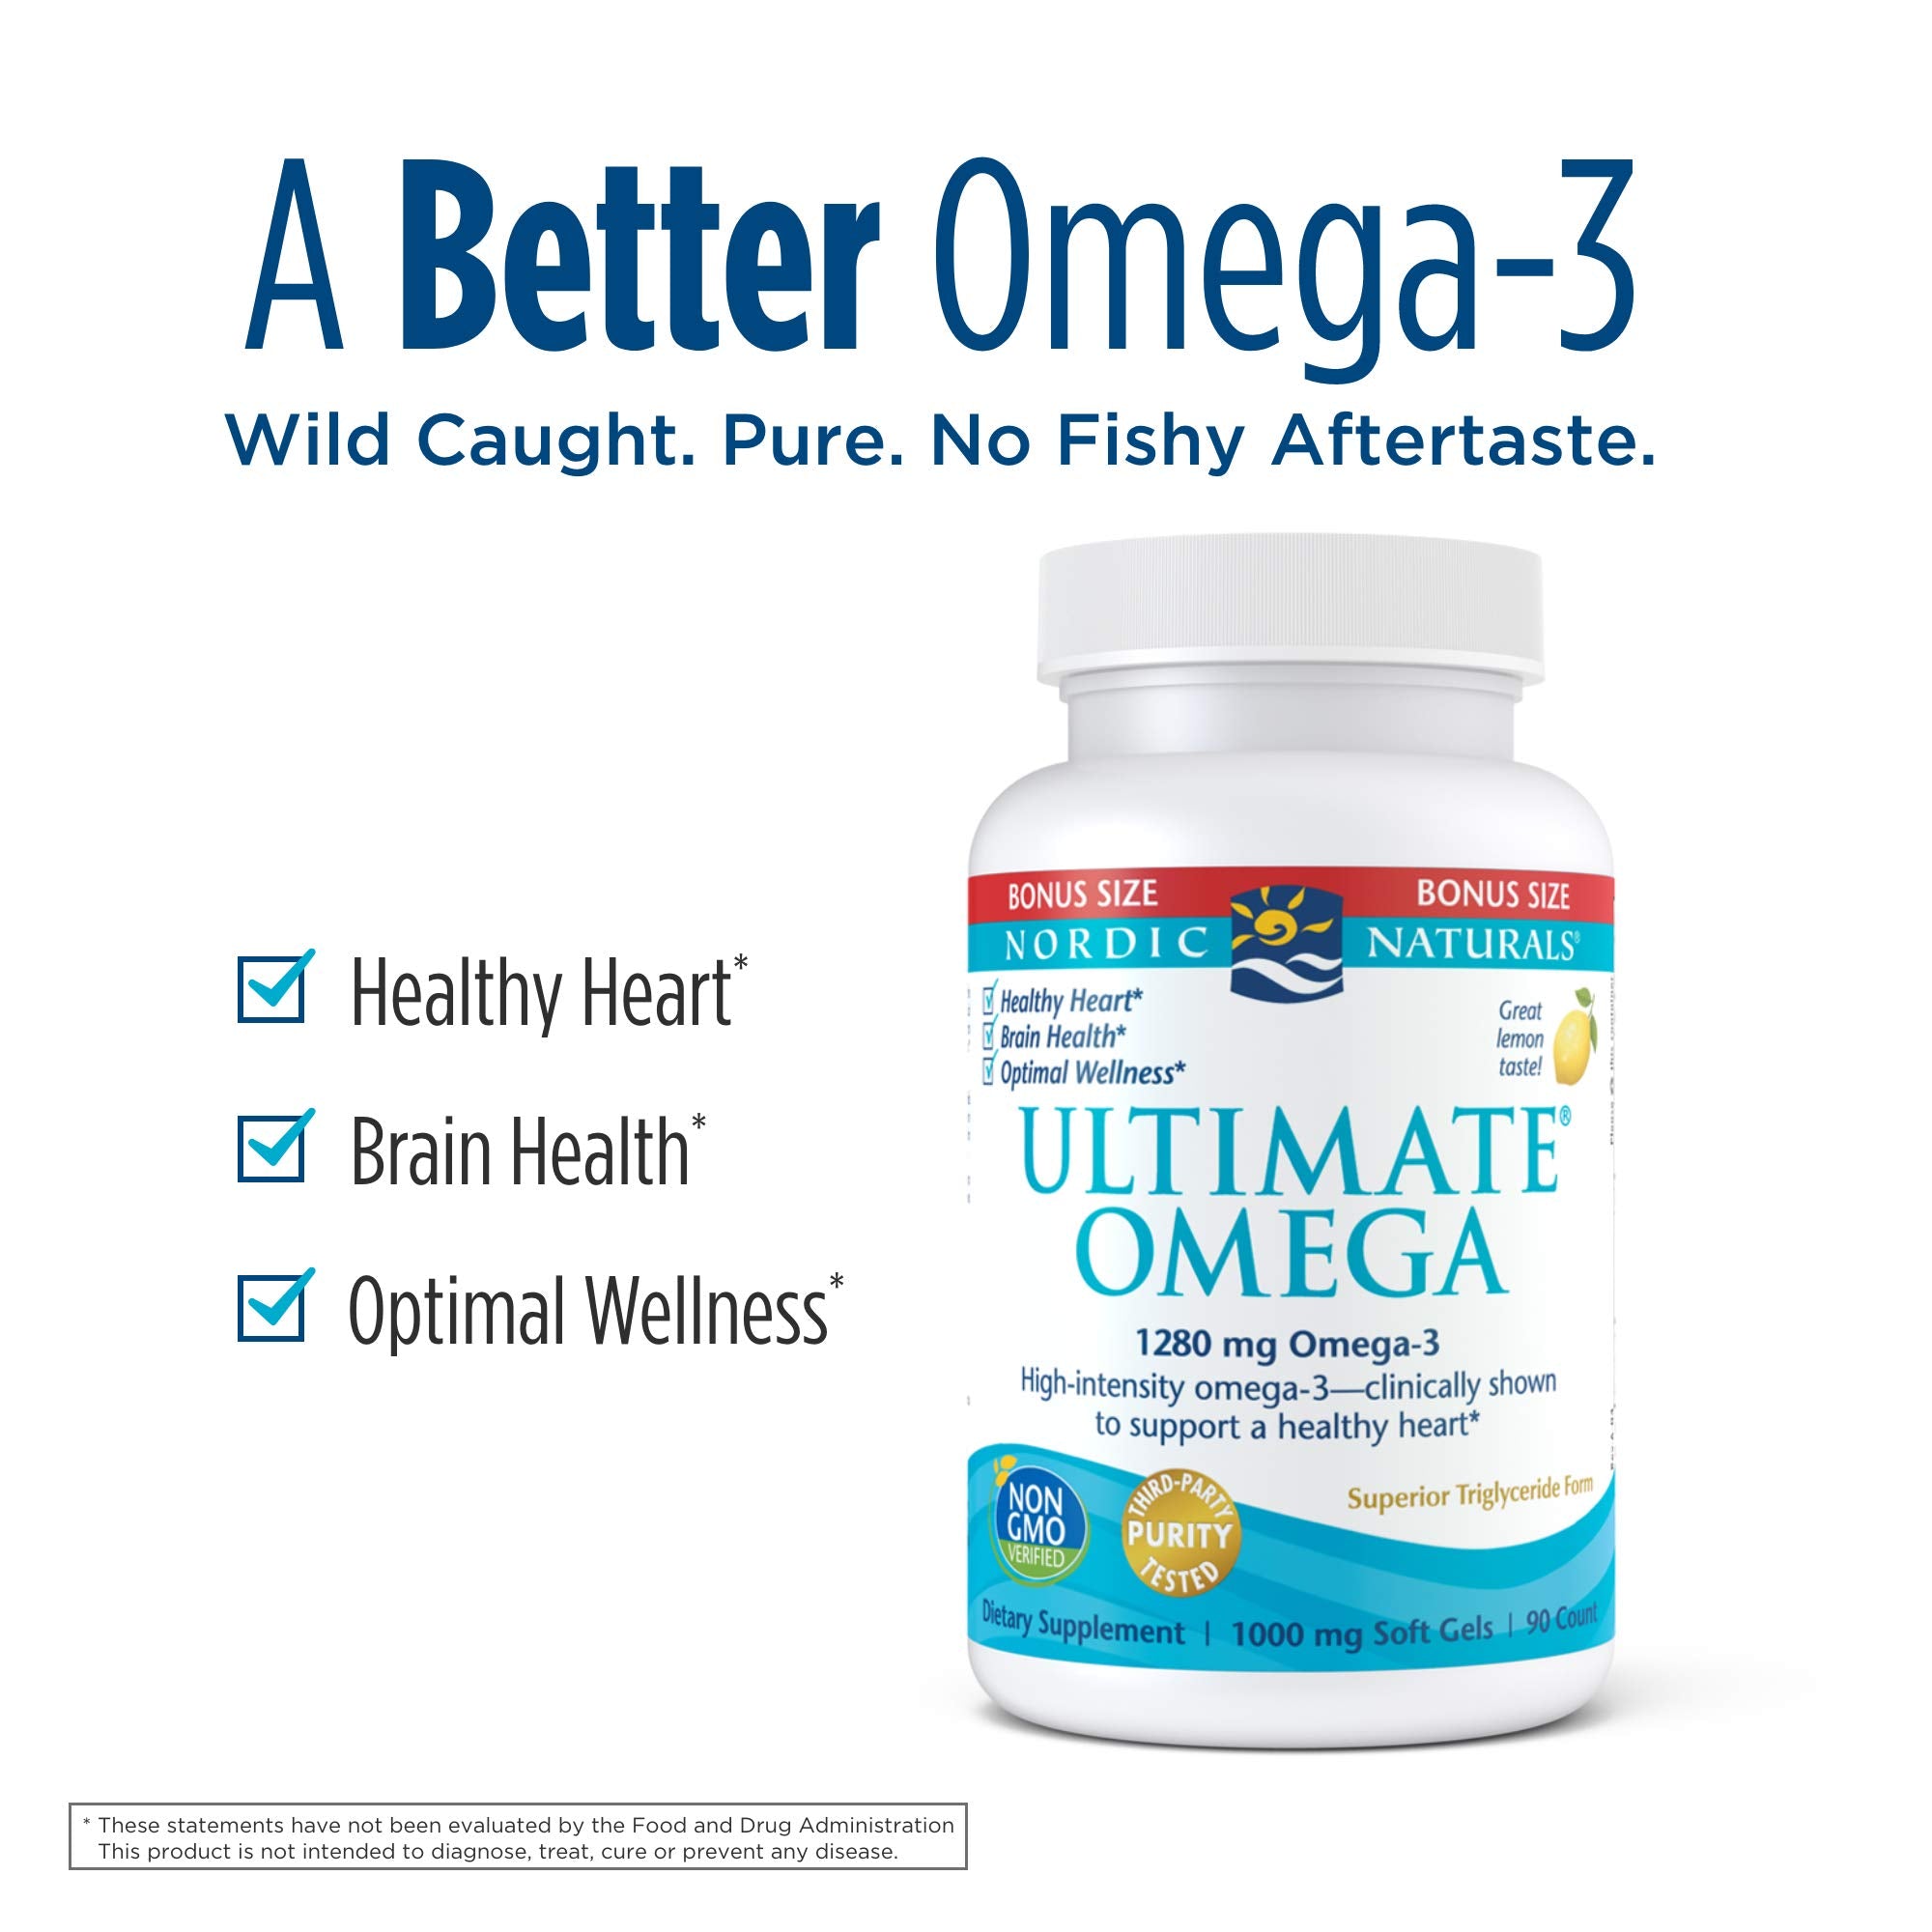 Nordic Naturals Ultimate Omega, Lemon Flavor - 1280 mg Omega-3-90 Soft Gels - High-Potency Omega-3 Fish Oil Supplement with EPA & DHA - Promotes Brain & Heart Health - Non-GMO - 45 Servings